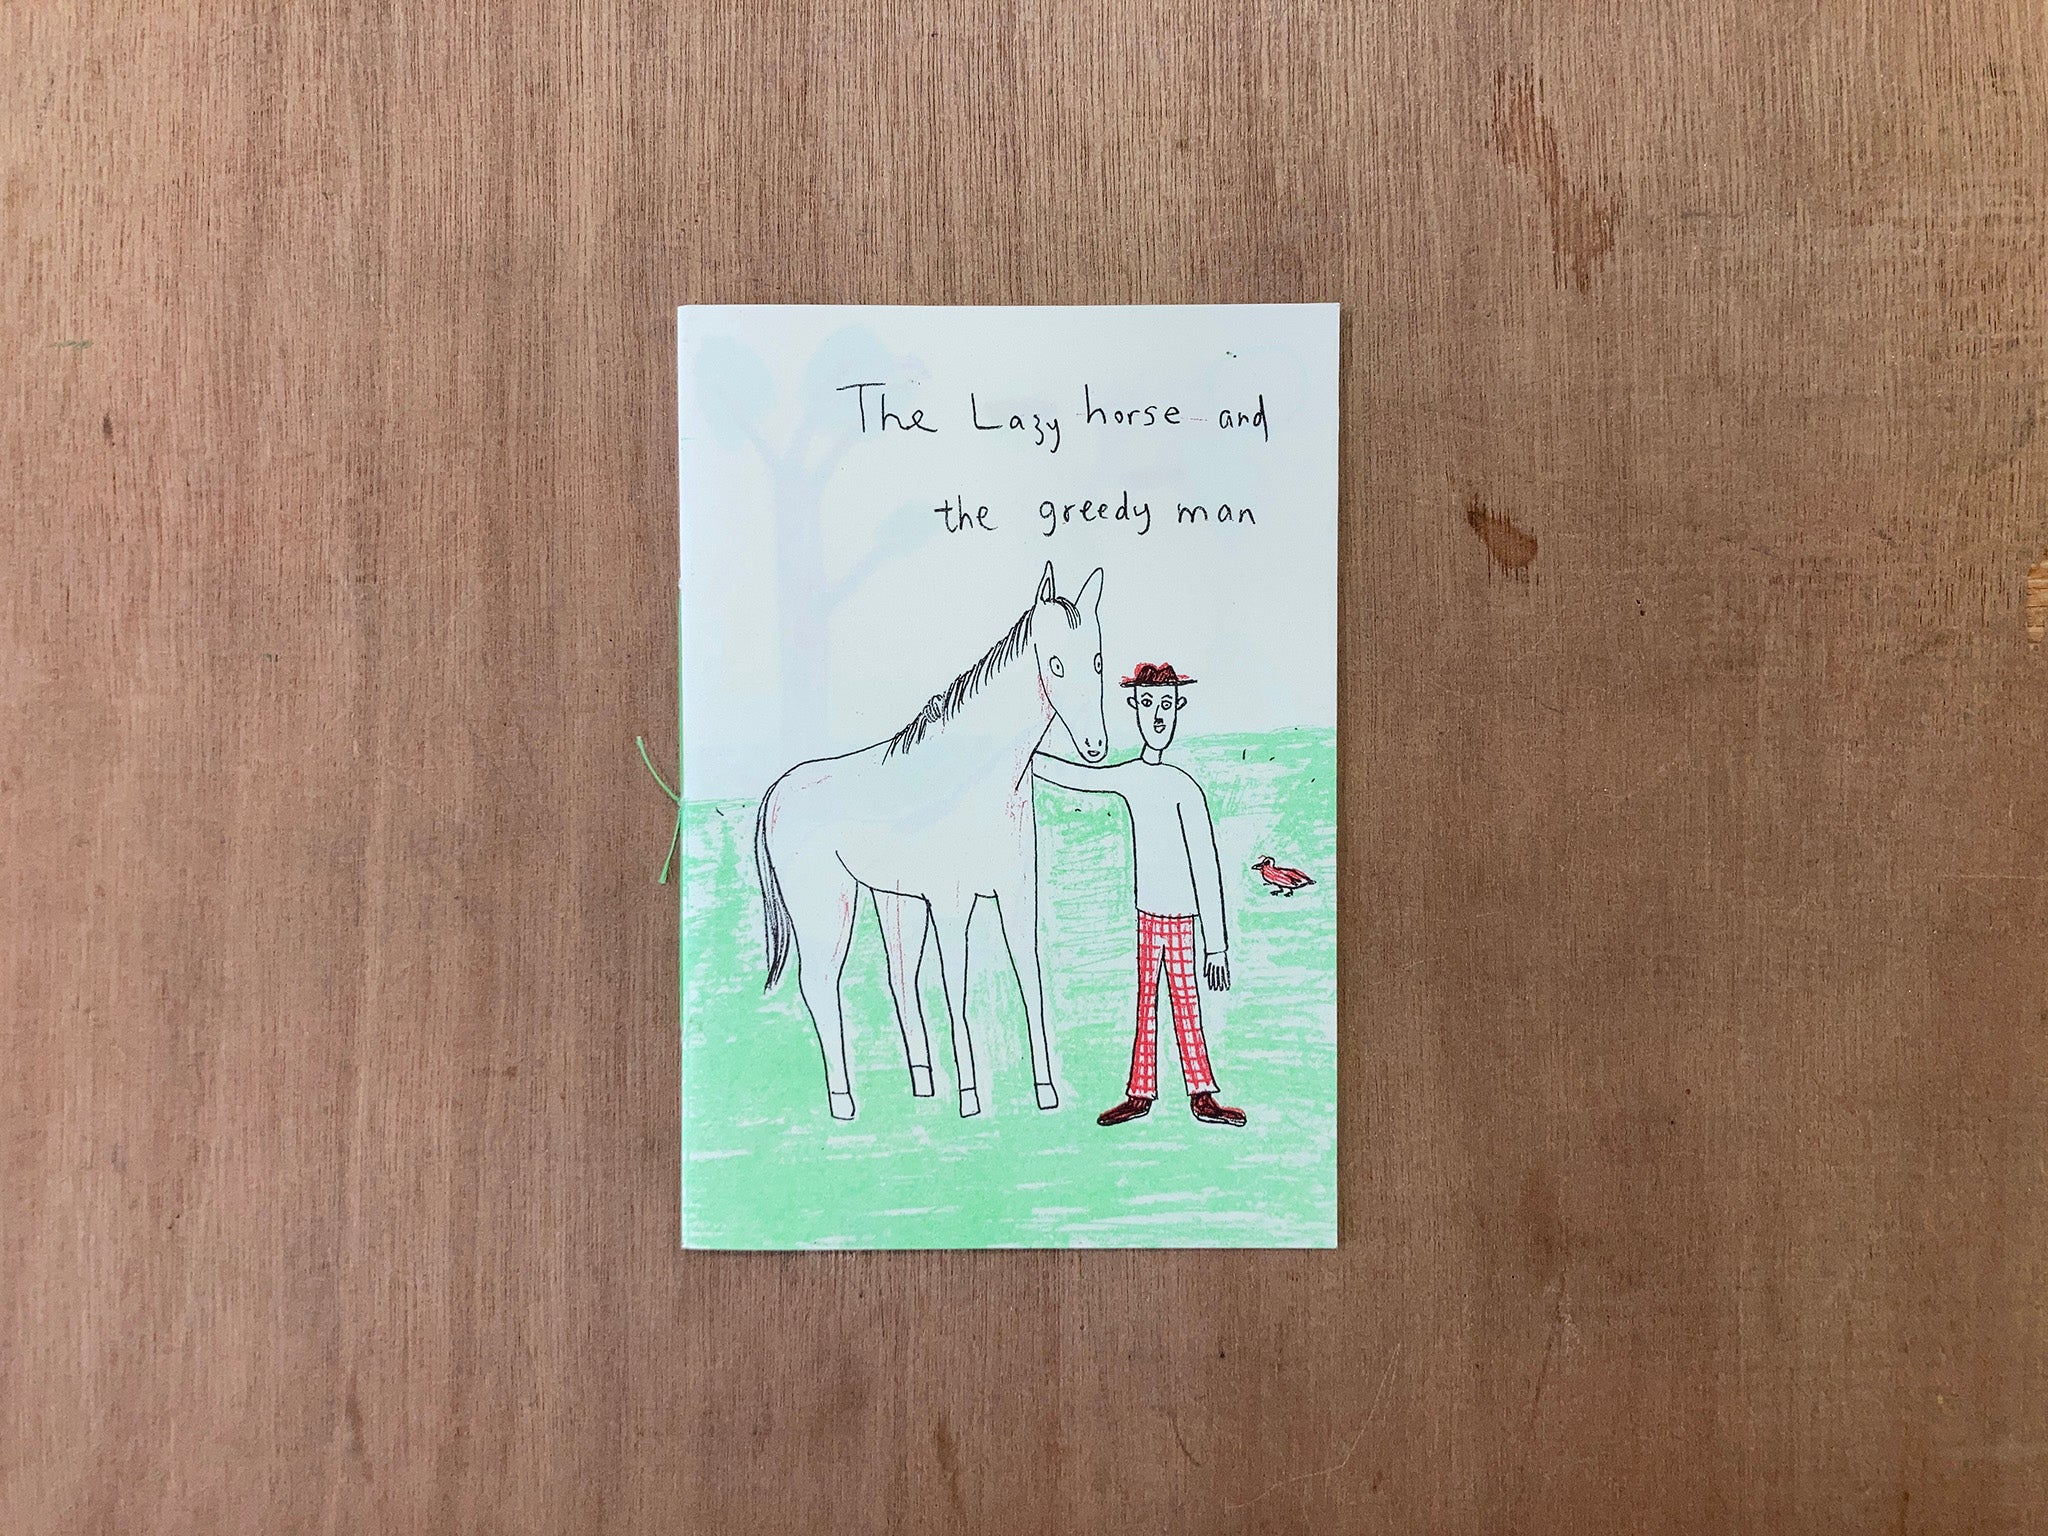 THE LAZY HORSE AND THE GREEDY MAN by An Gee Chan